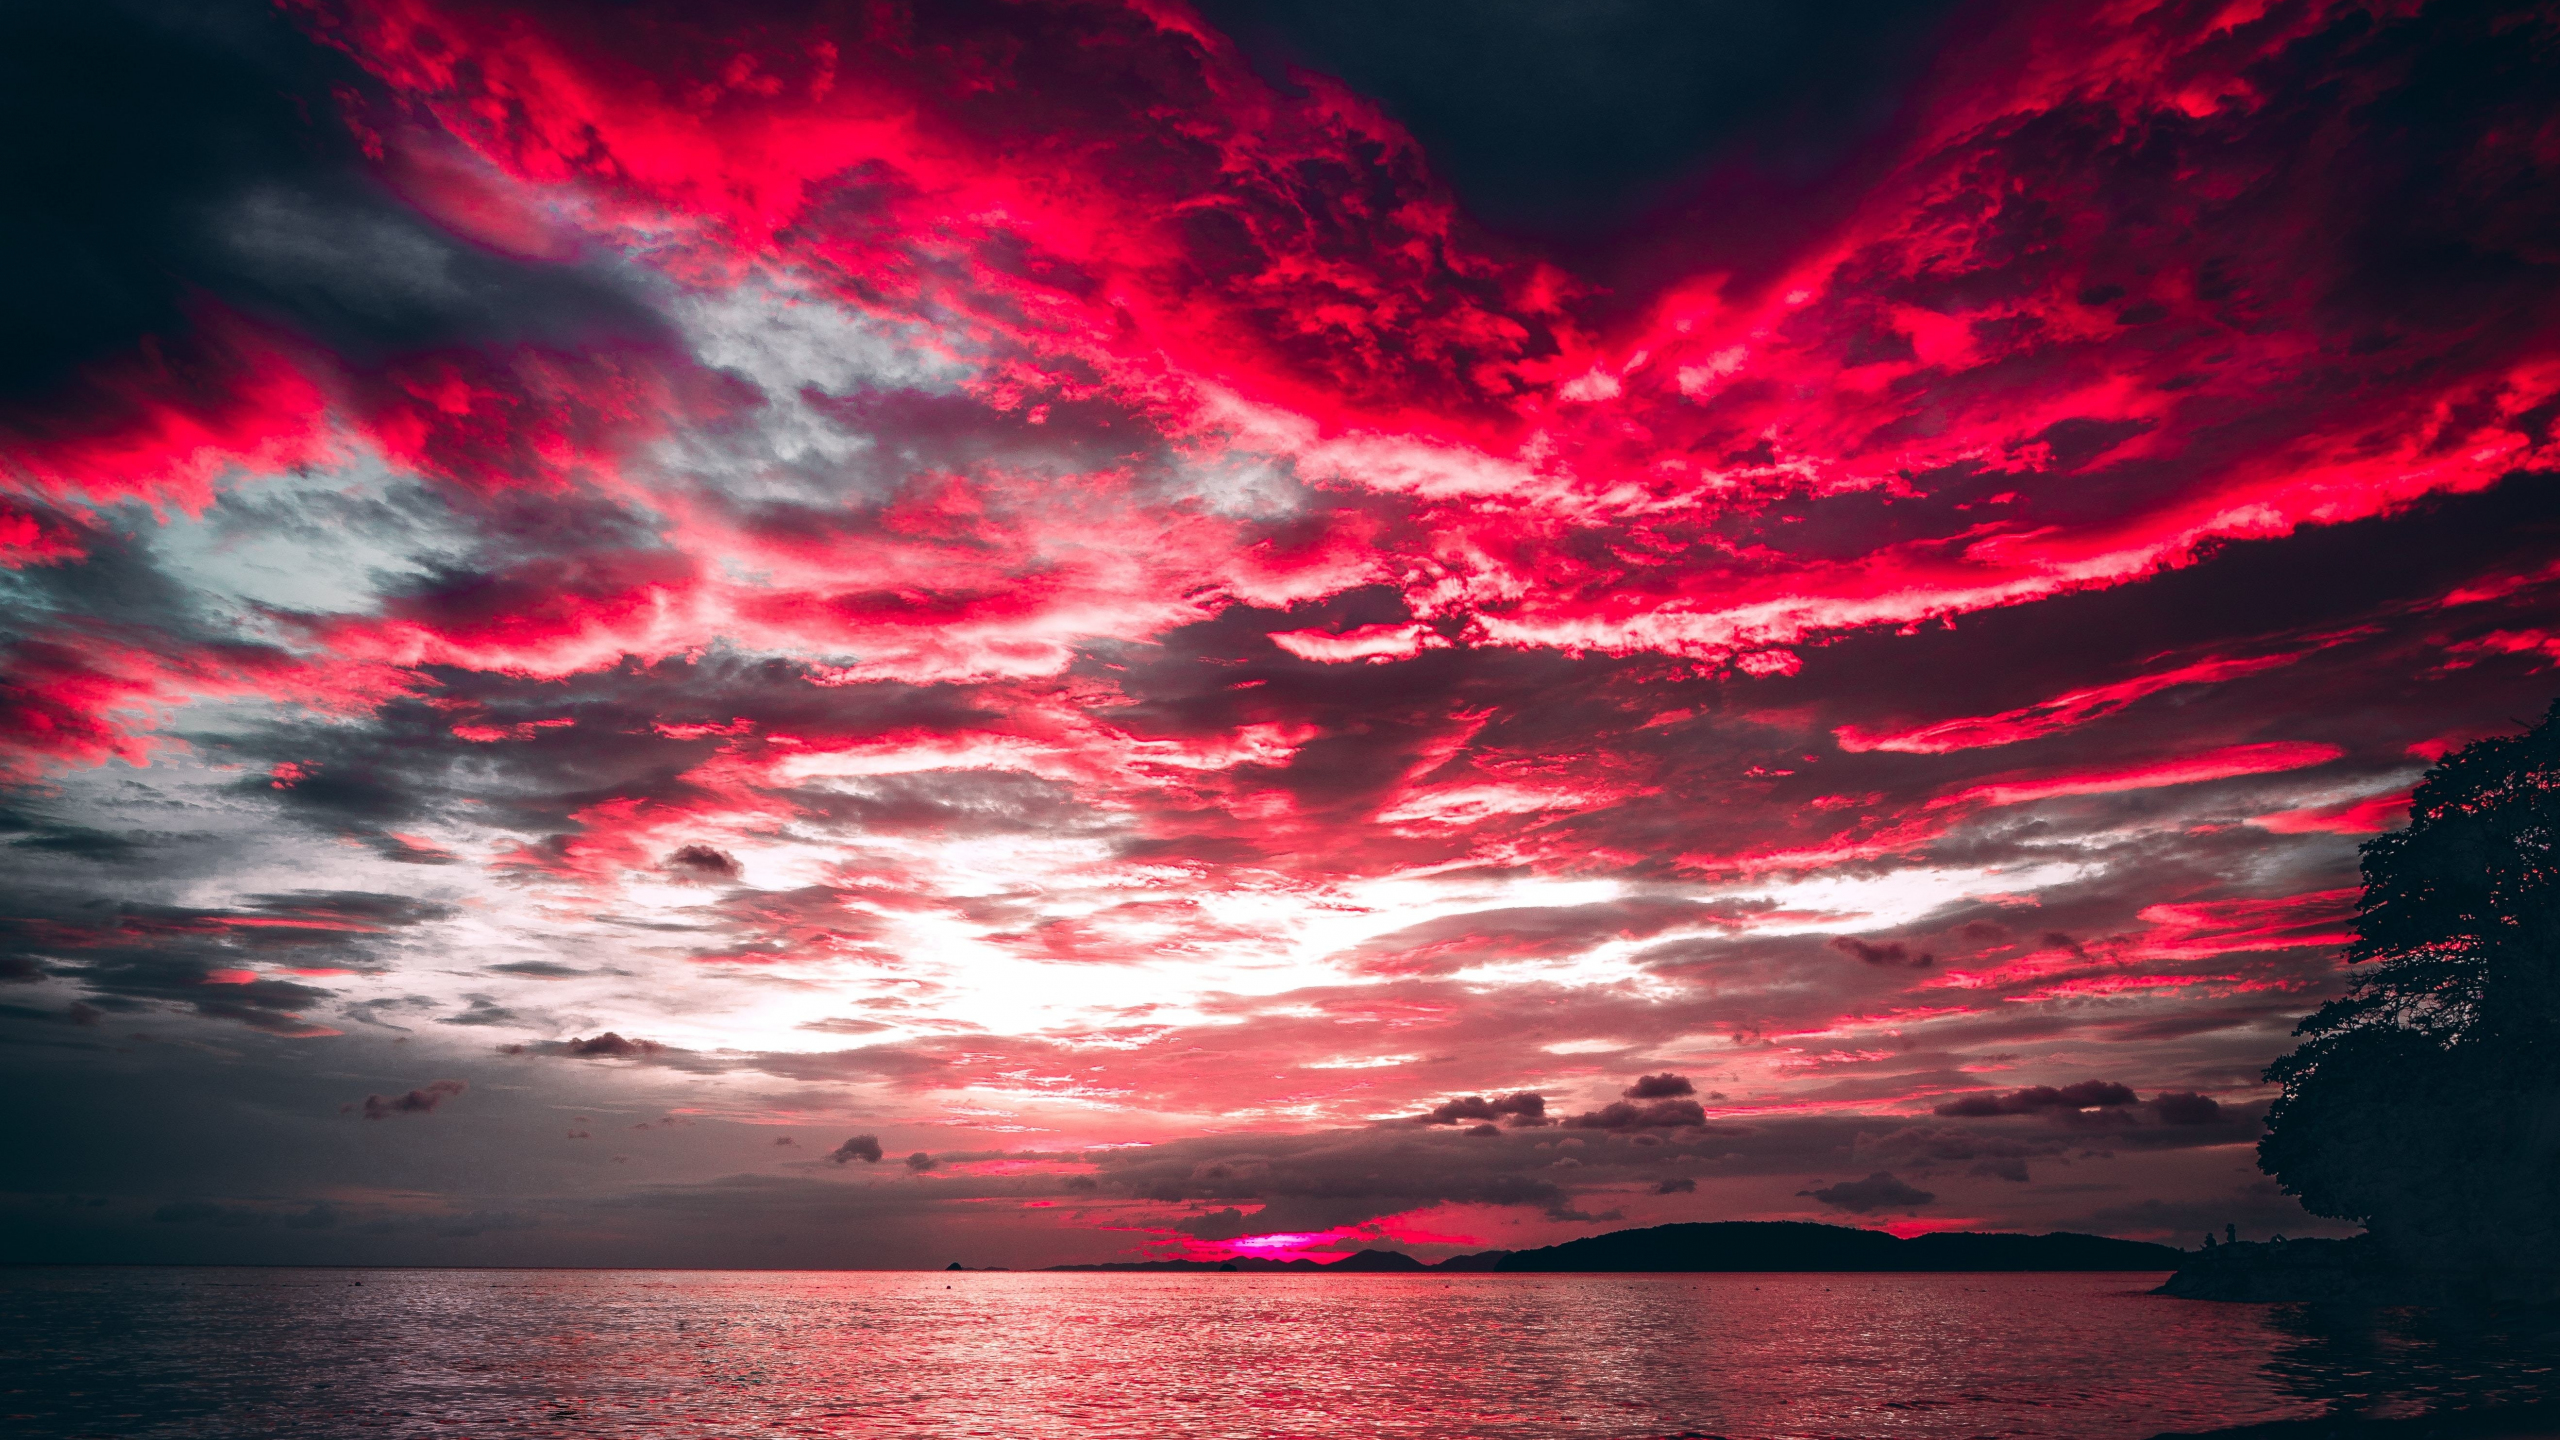 Download Wallpaper 2560x1440 Sea Sunset Red Clouds Nature Dual Wide